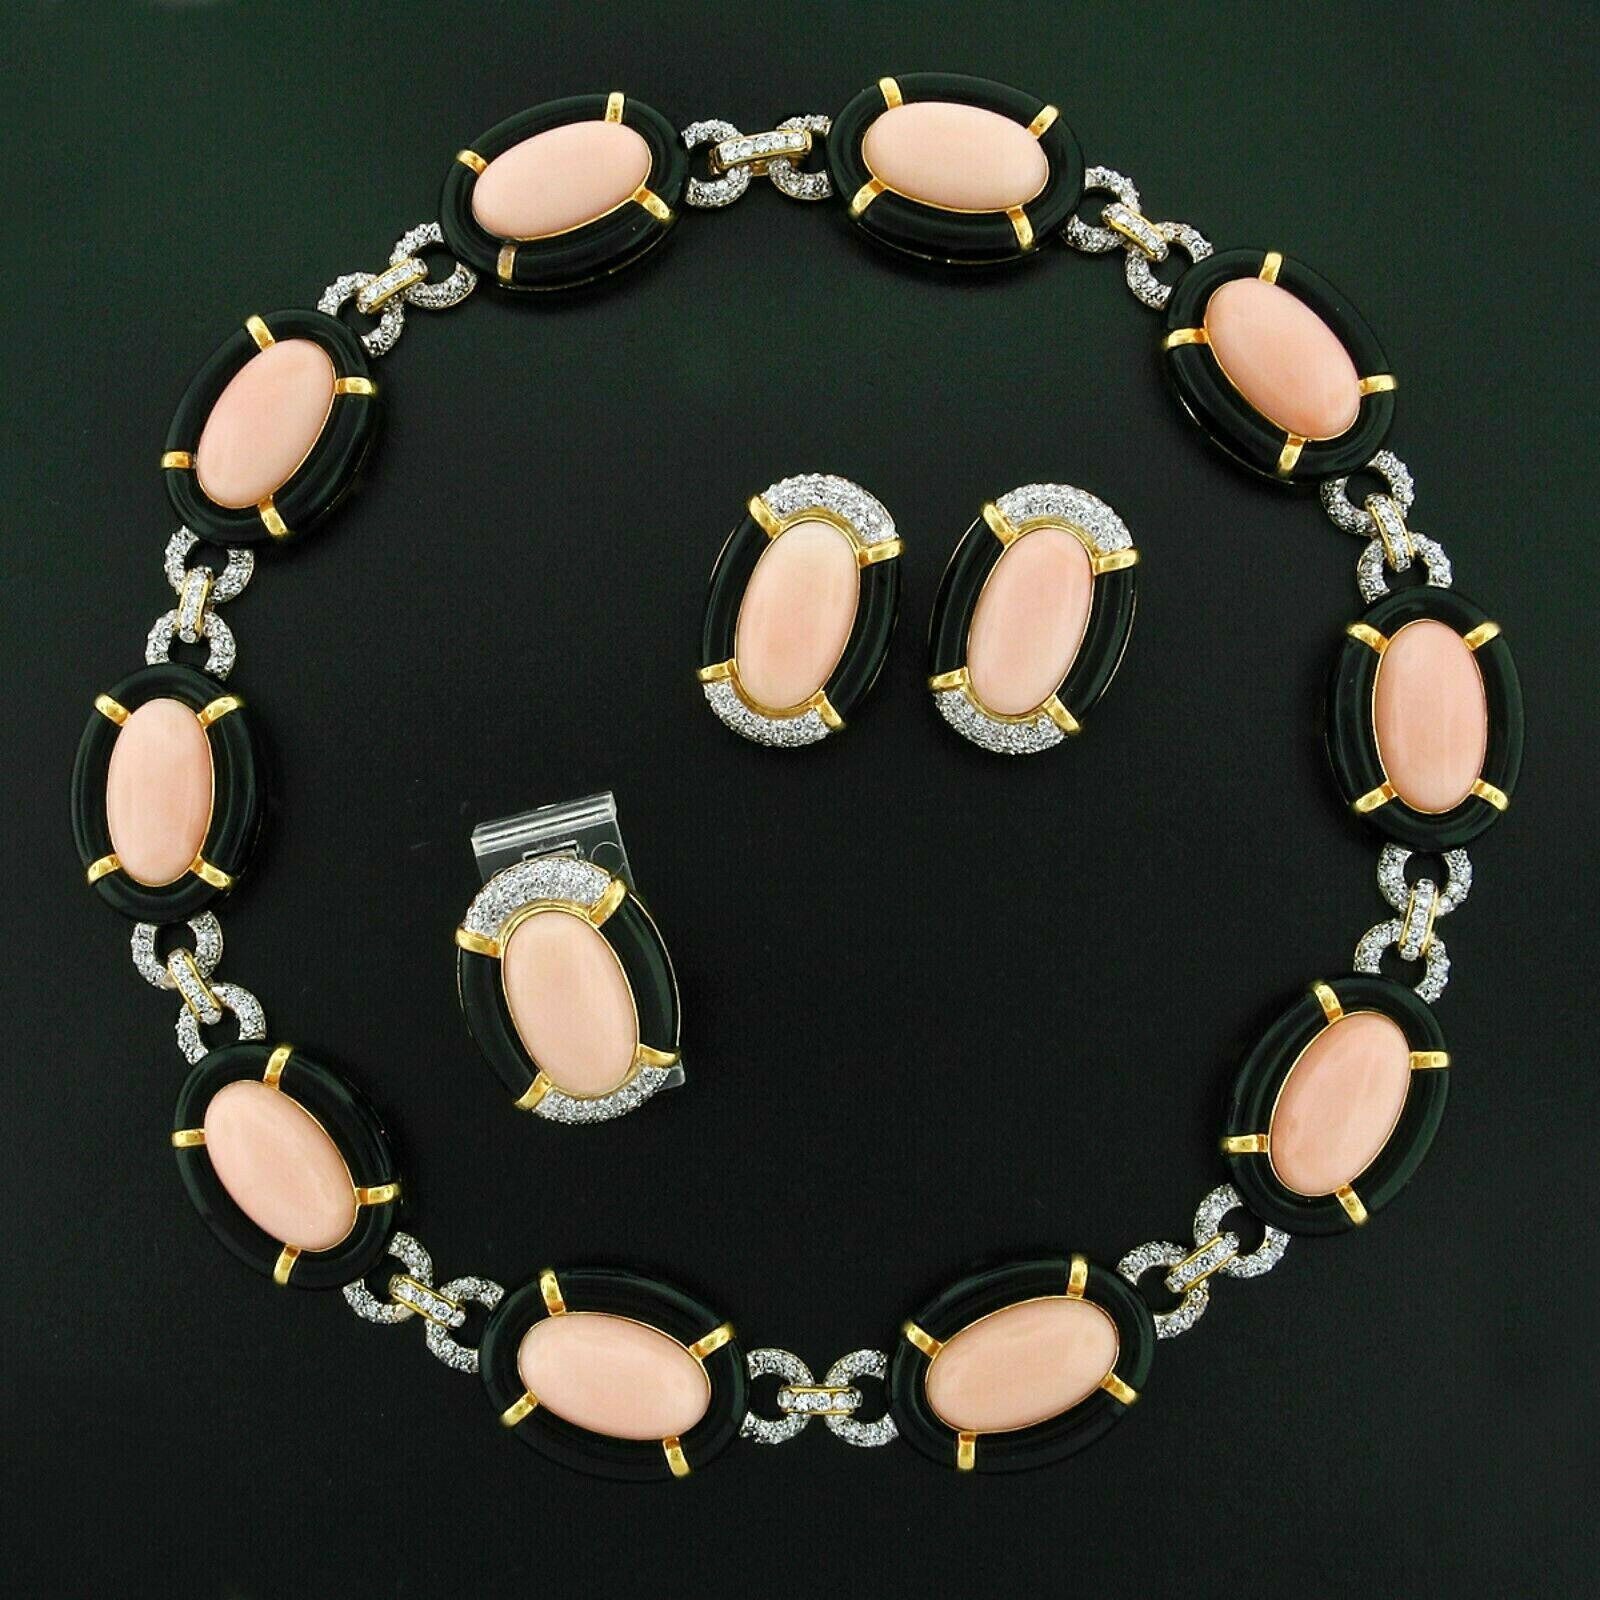 Here we have an outstanding vintage jewelry set crafted from solid 18k yellow and white gold. The set consists of a ring, earrings, and a necklace all made in the same coral, black onyx, and diamond pattern. 

The ring has an oval cabochon coral